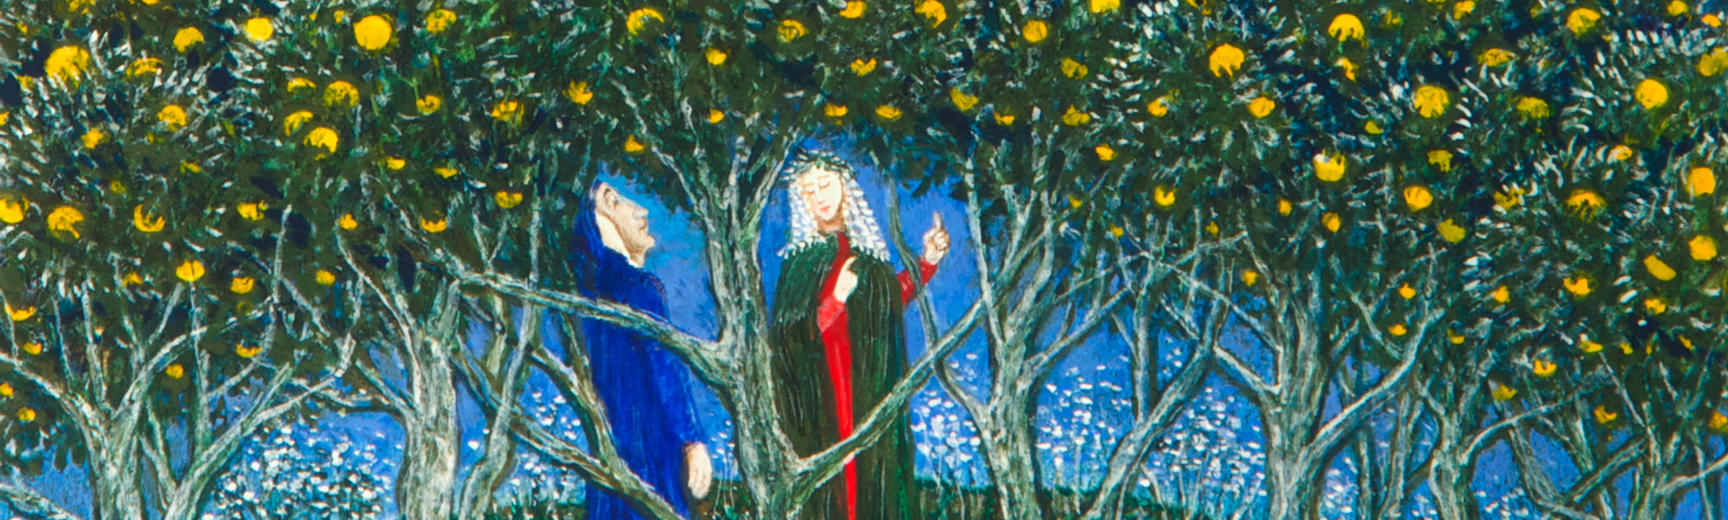 Painting of Dante and Beatrice stood amongst trees with yellow flowers on, under a deep blue sky